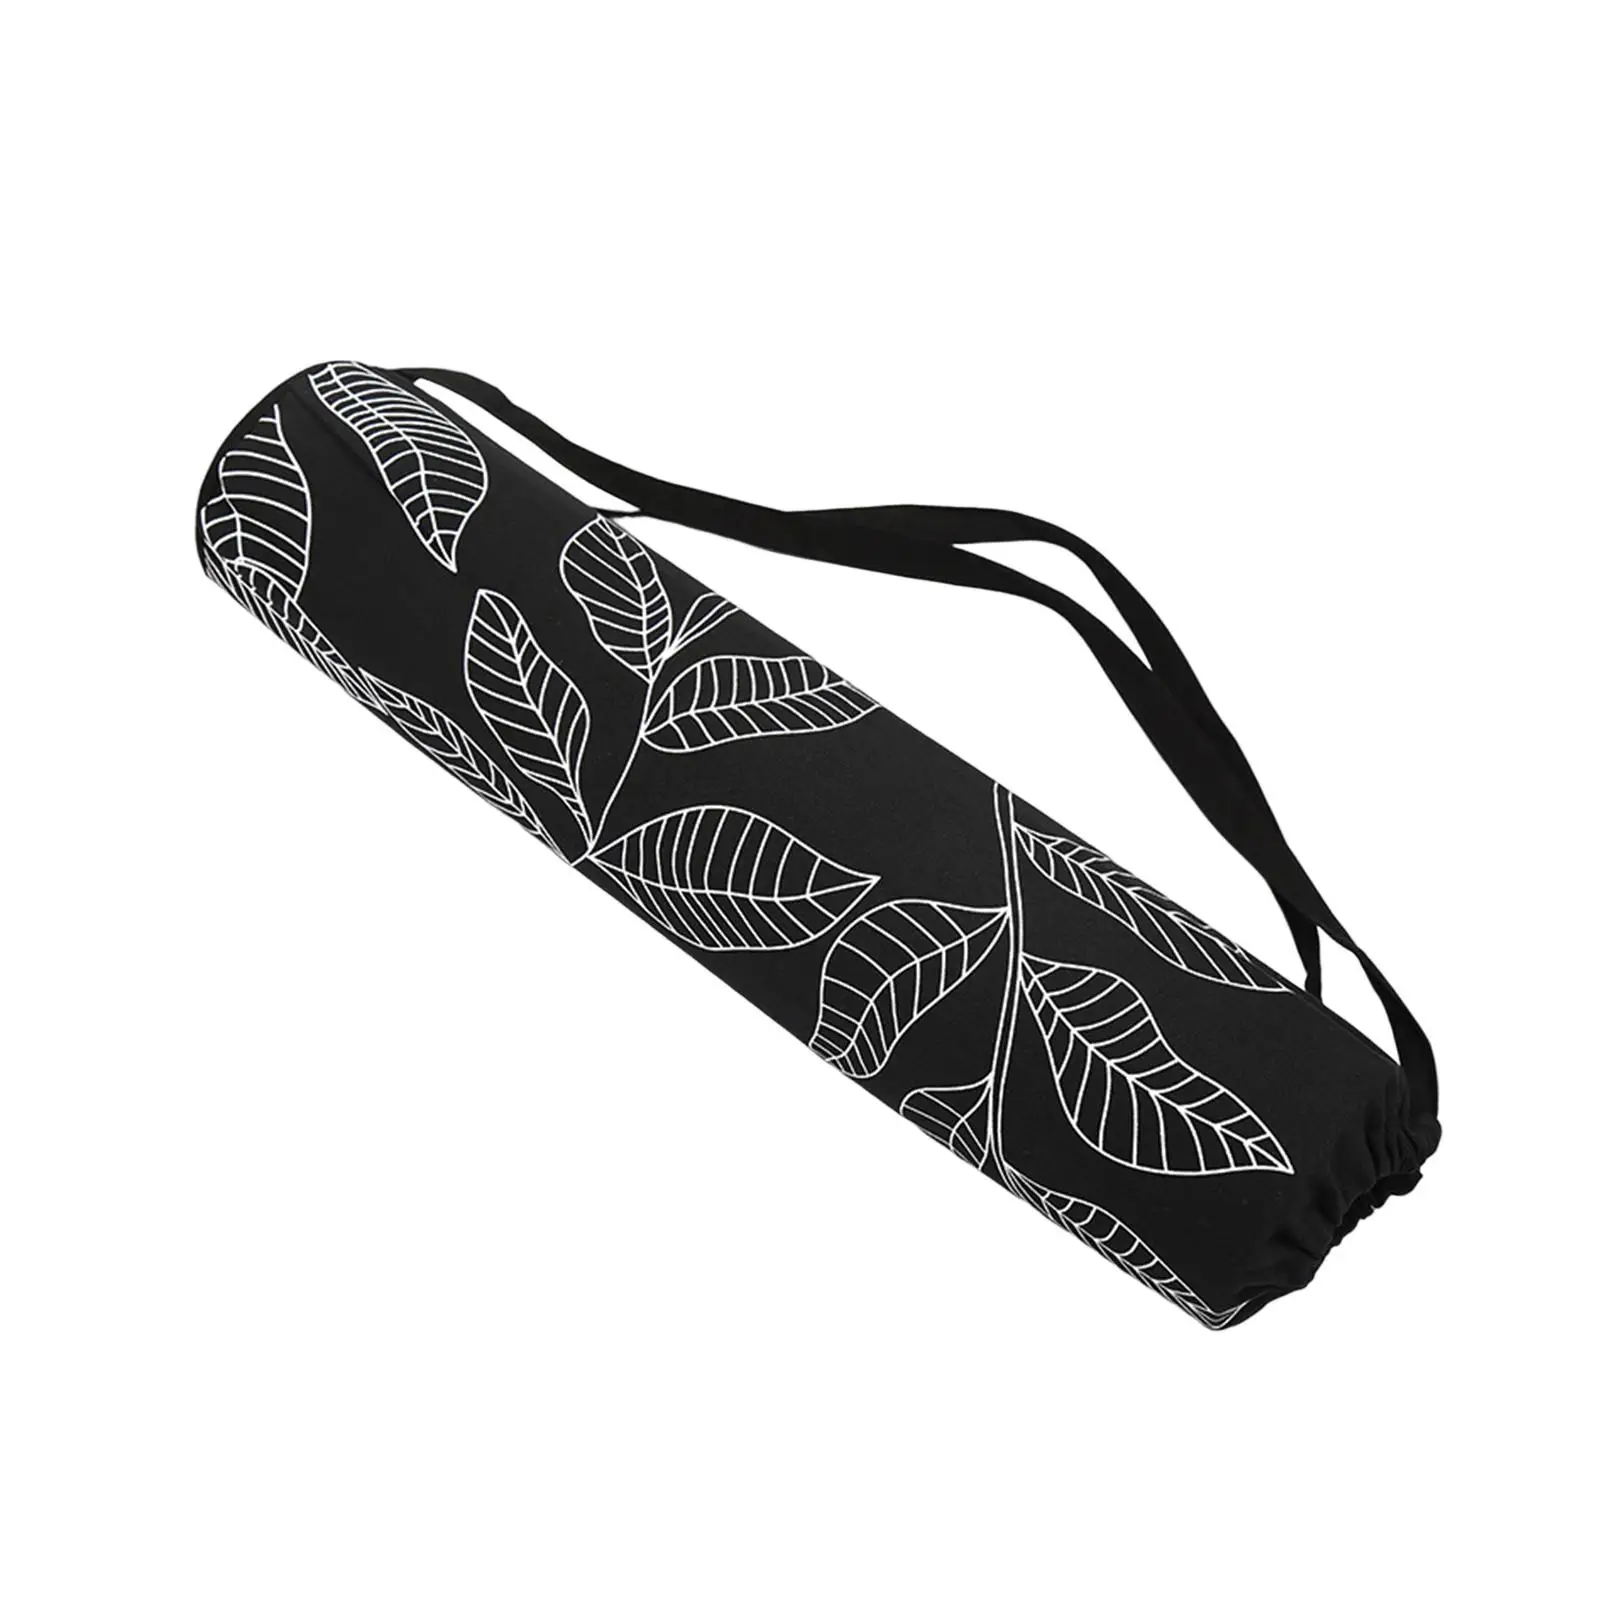 Travel Yoga Mat Carrier Bag for Yoga Practice Exercise and Fitness Exercise Yoga Carrying Bag Lightweight Multifunctional